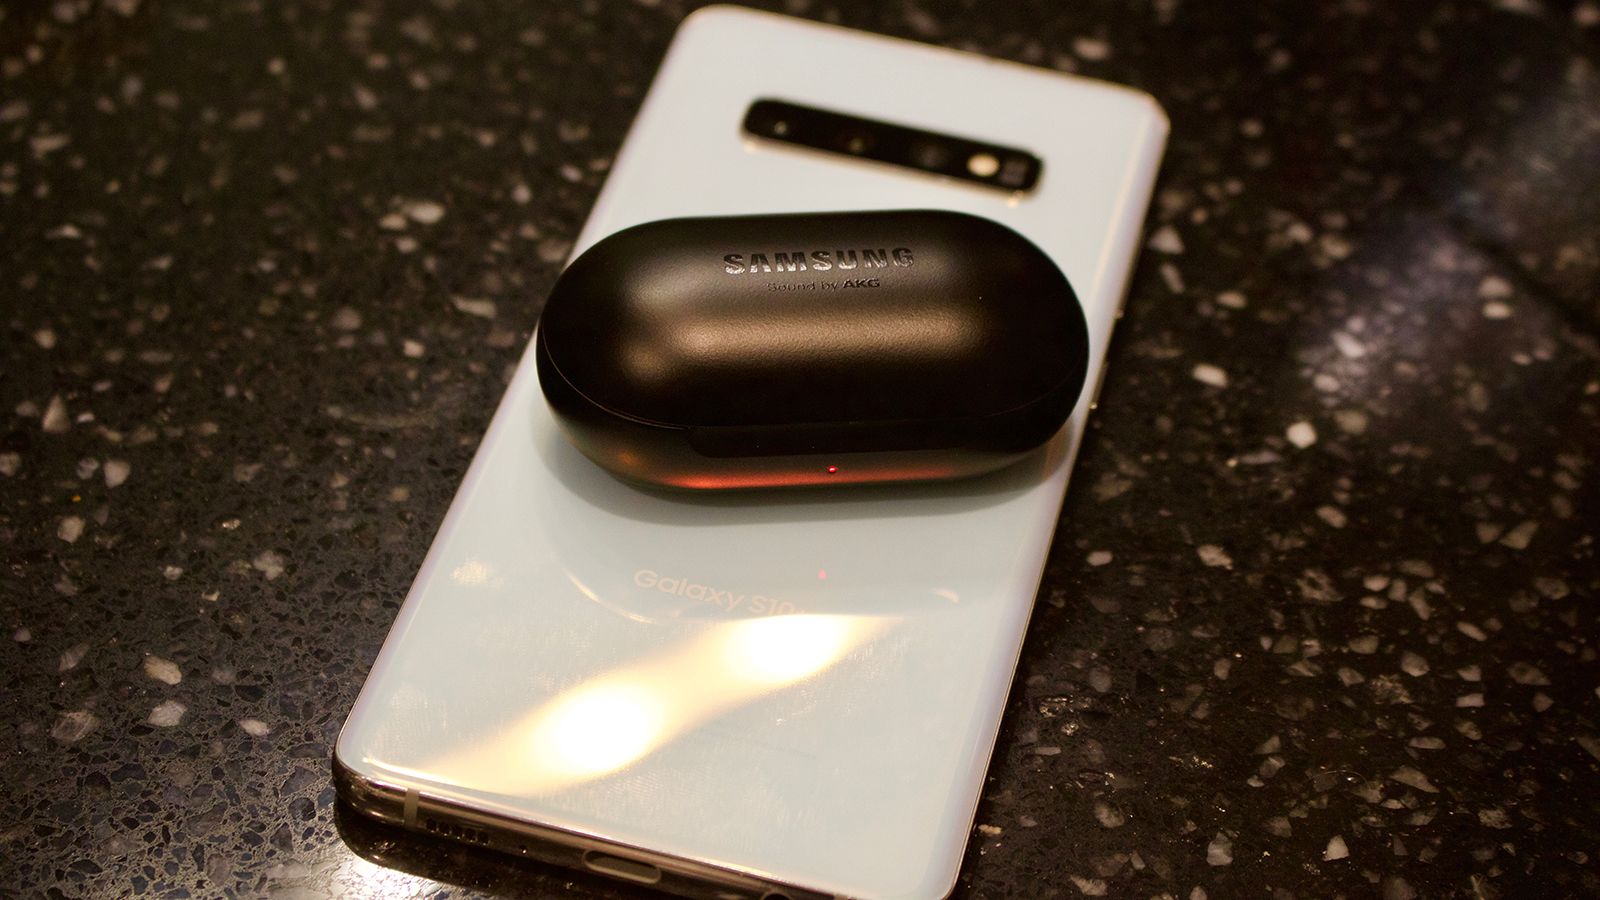 Samsung Galaxy Buds review: imperfectly acceptable - The Verge